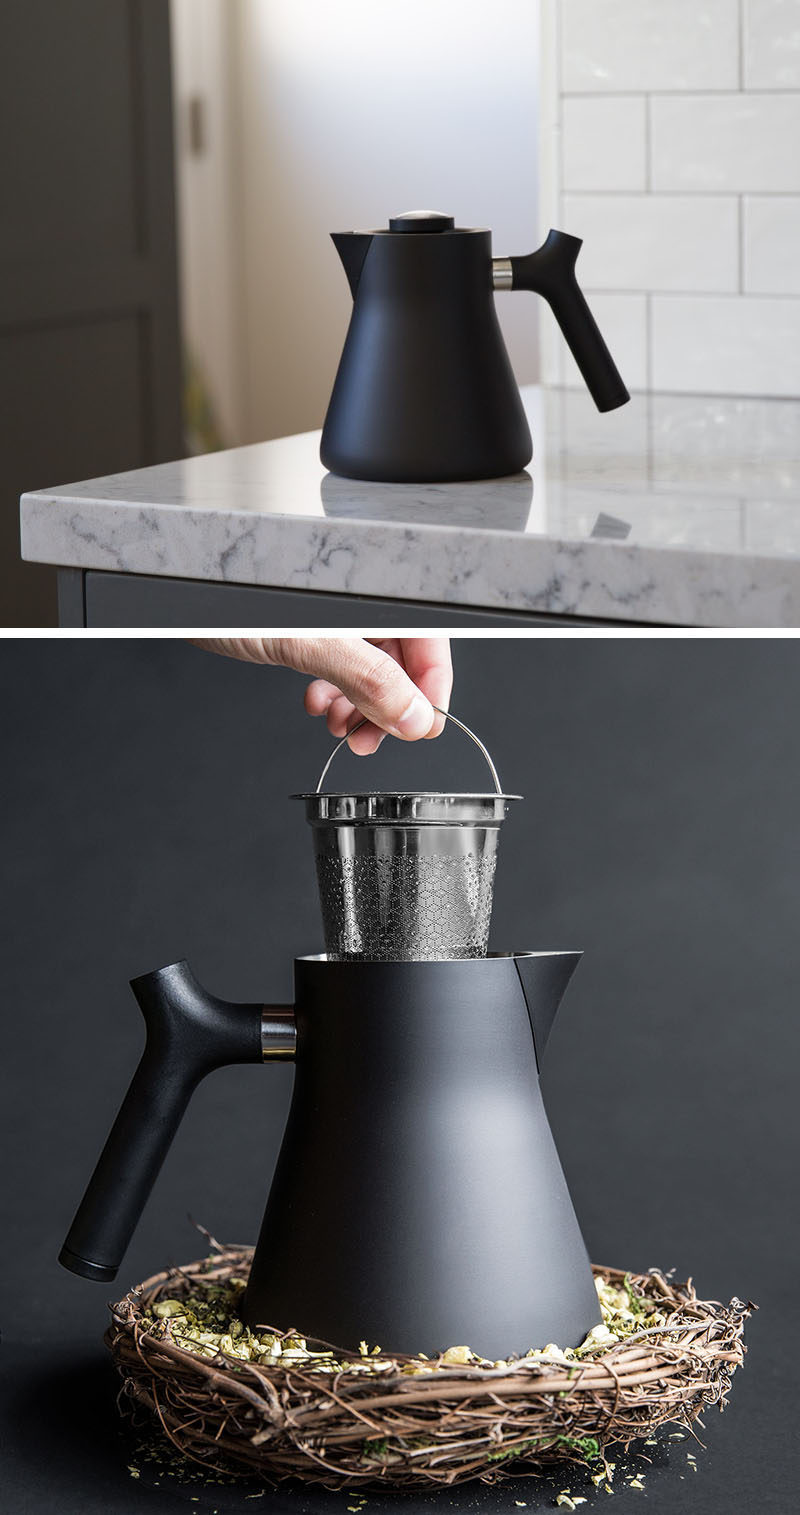 5 Essentials You Need When Hosting An Awesome Modern Tea Party // A simple tea pot in a solid color is the best way to keep things modern.